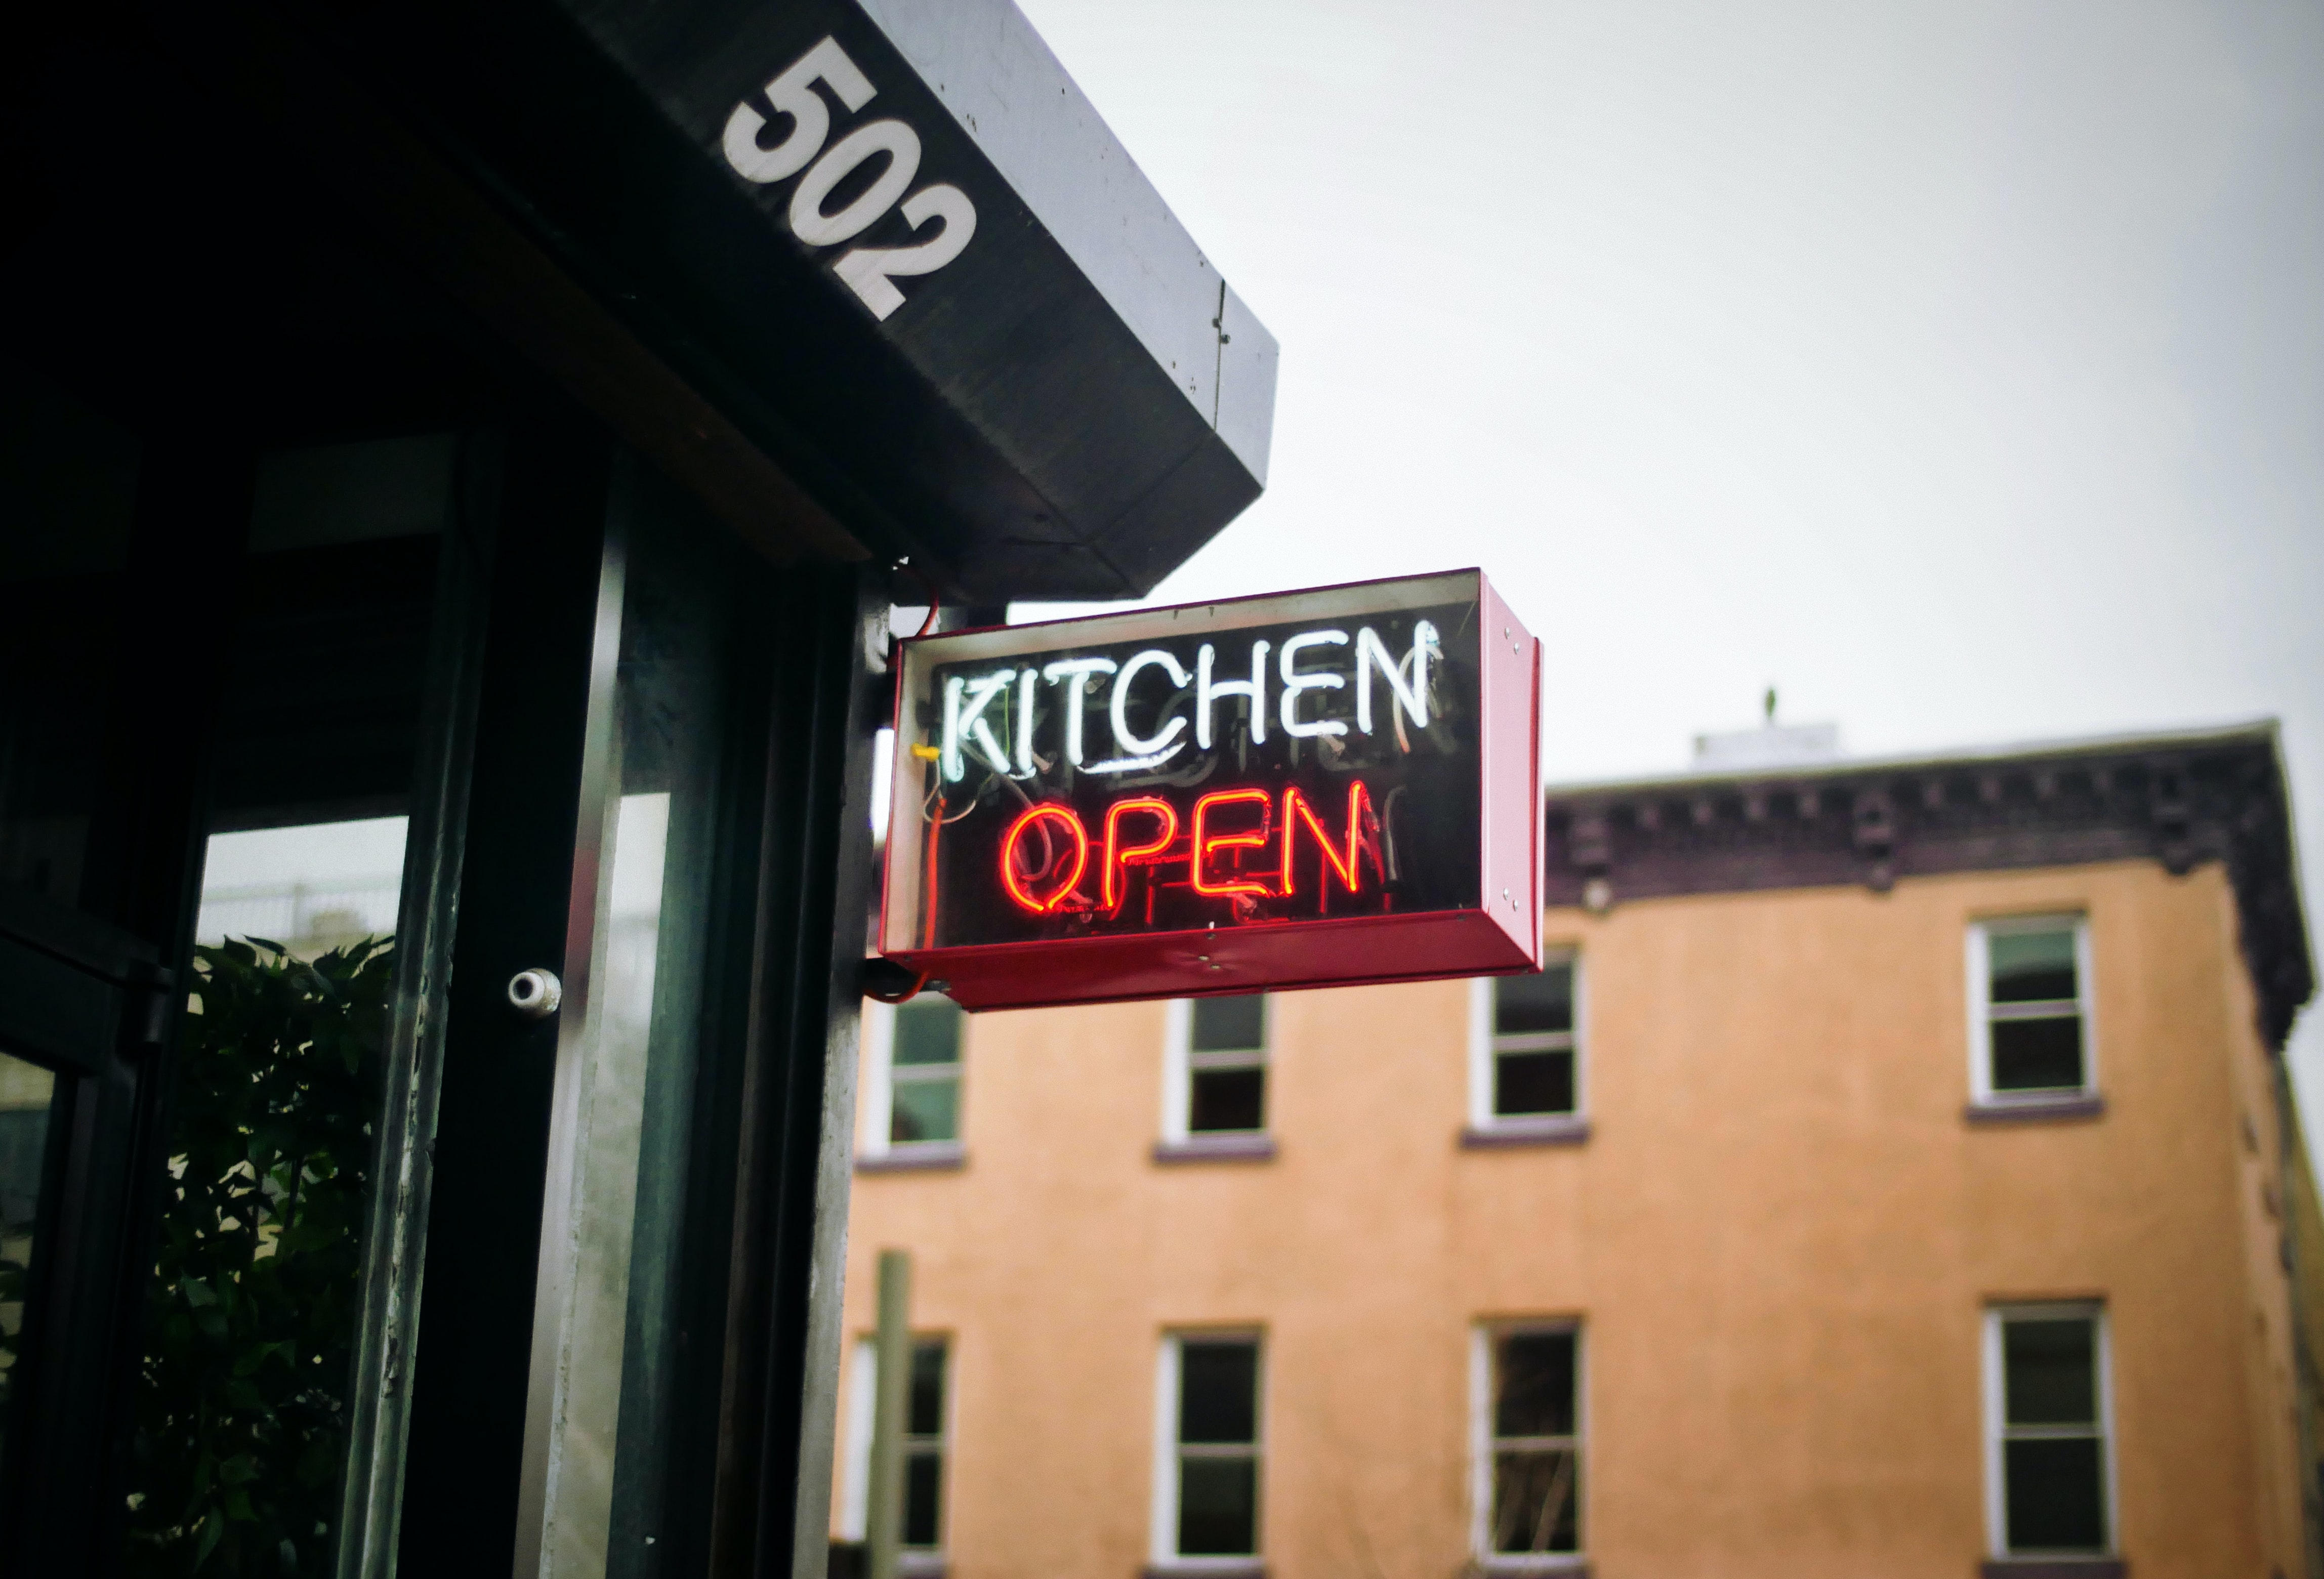 A lit up sign saying "Kitchen Open" outside of a restaurant.